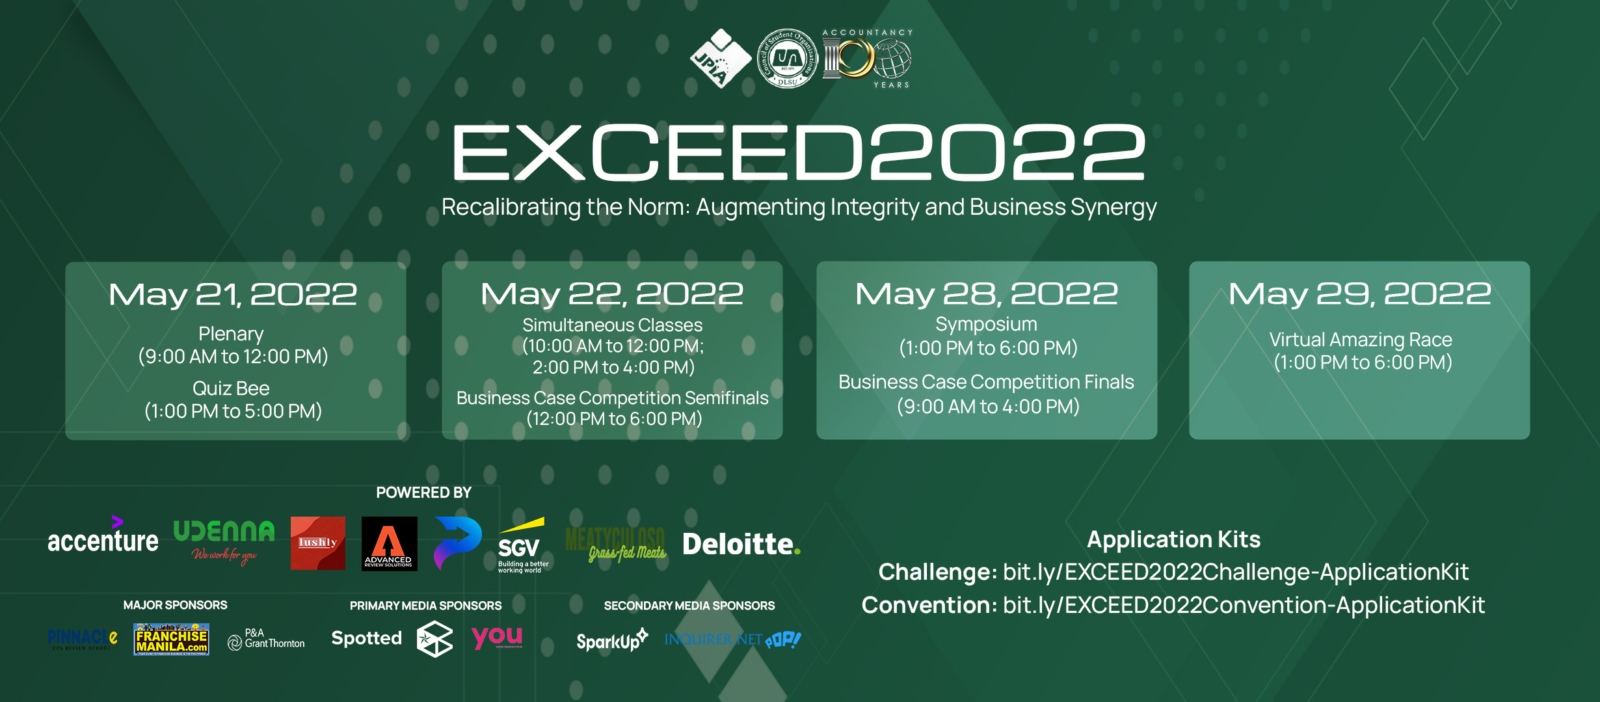 exceed2022